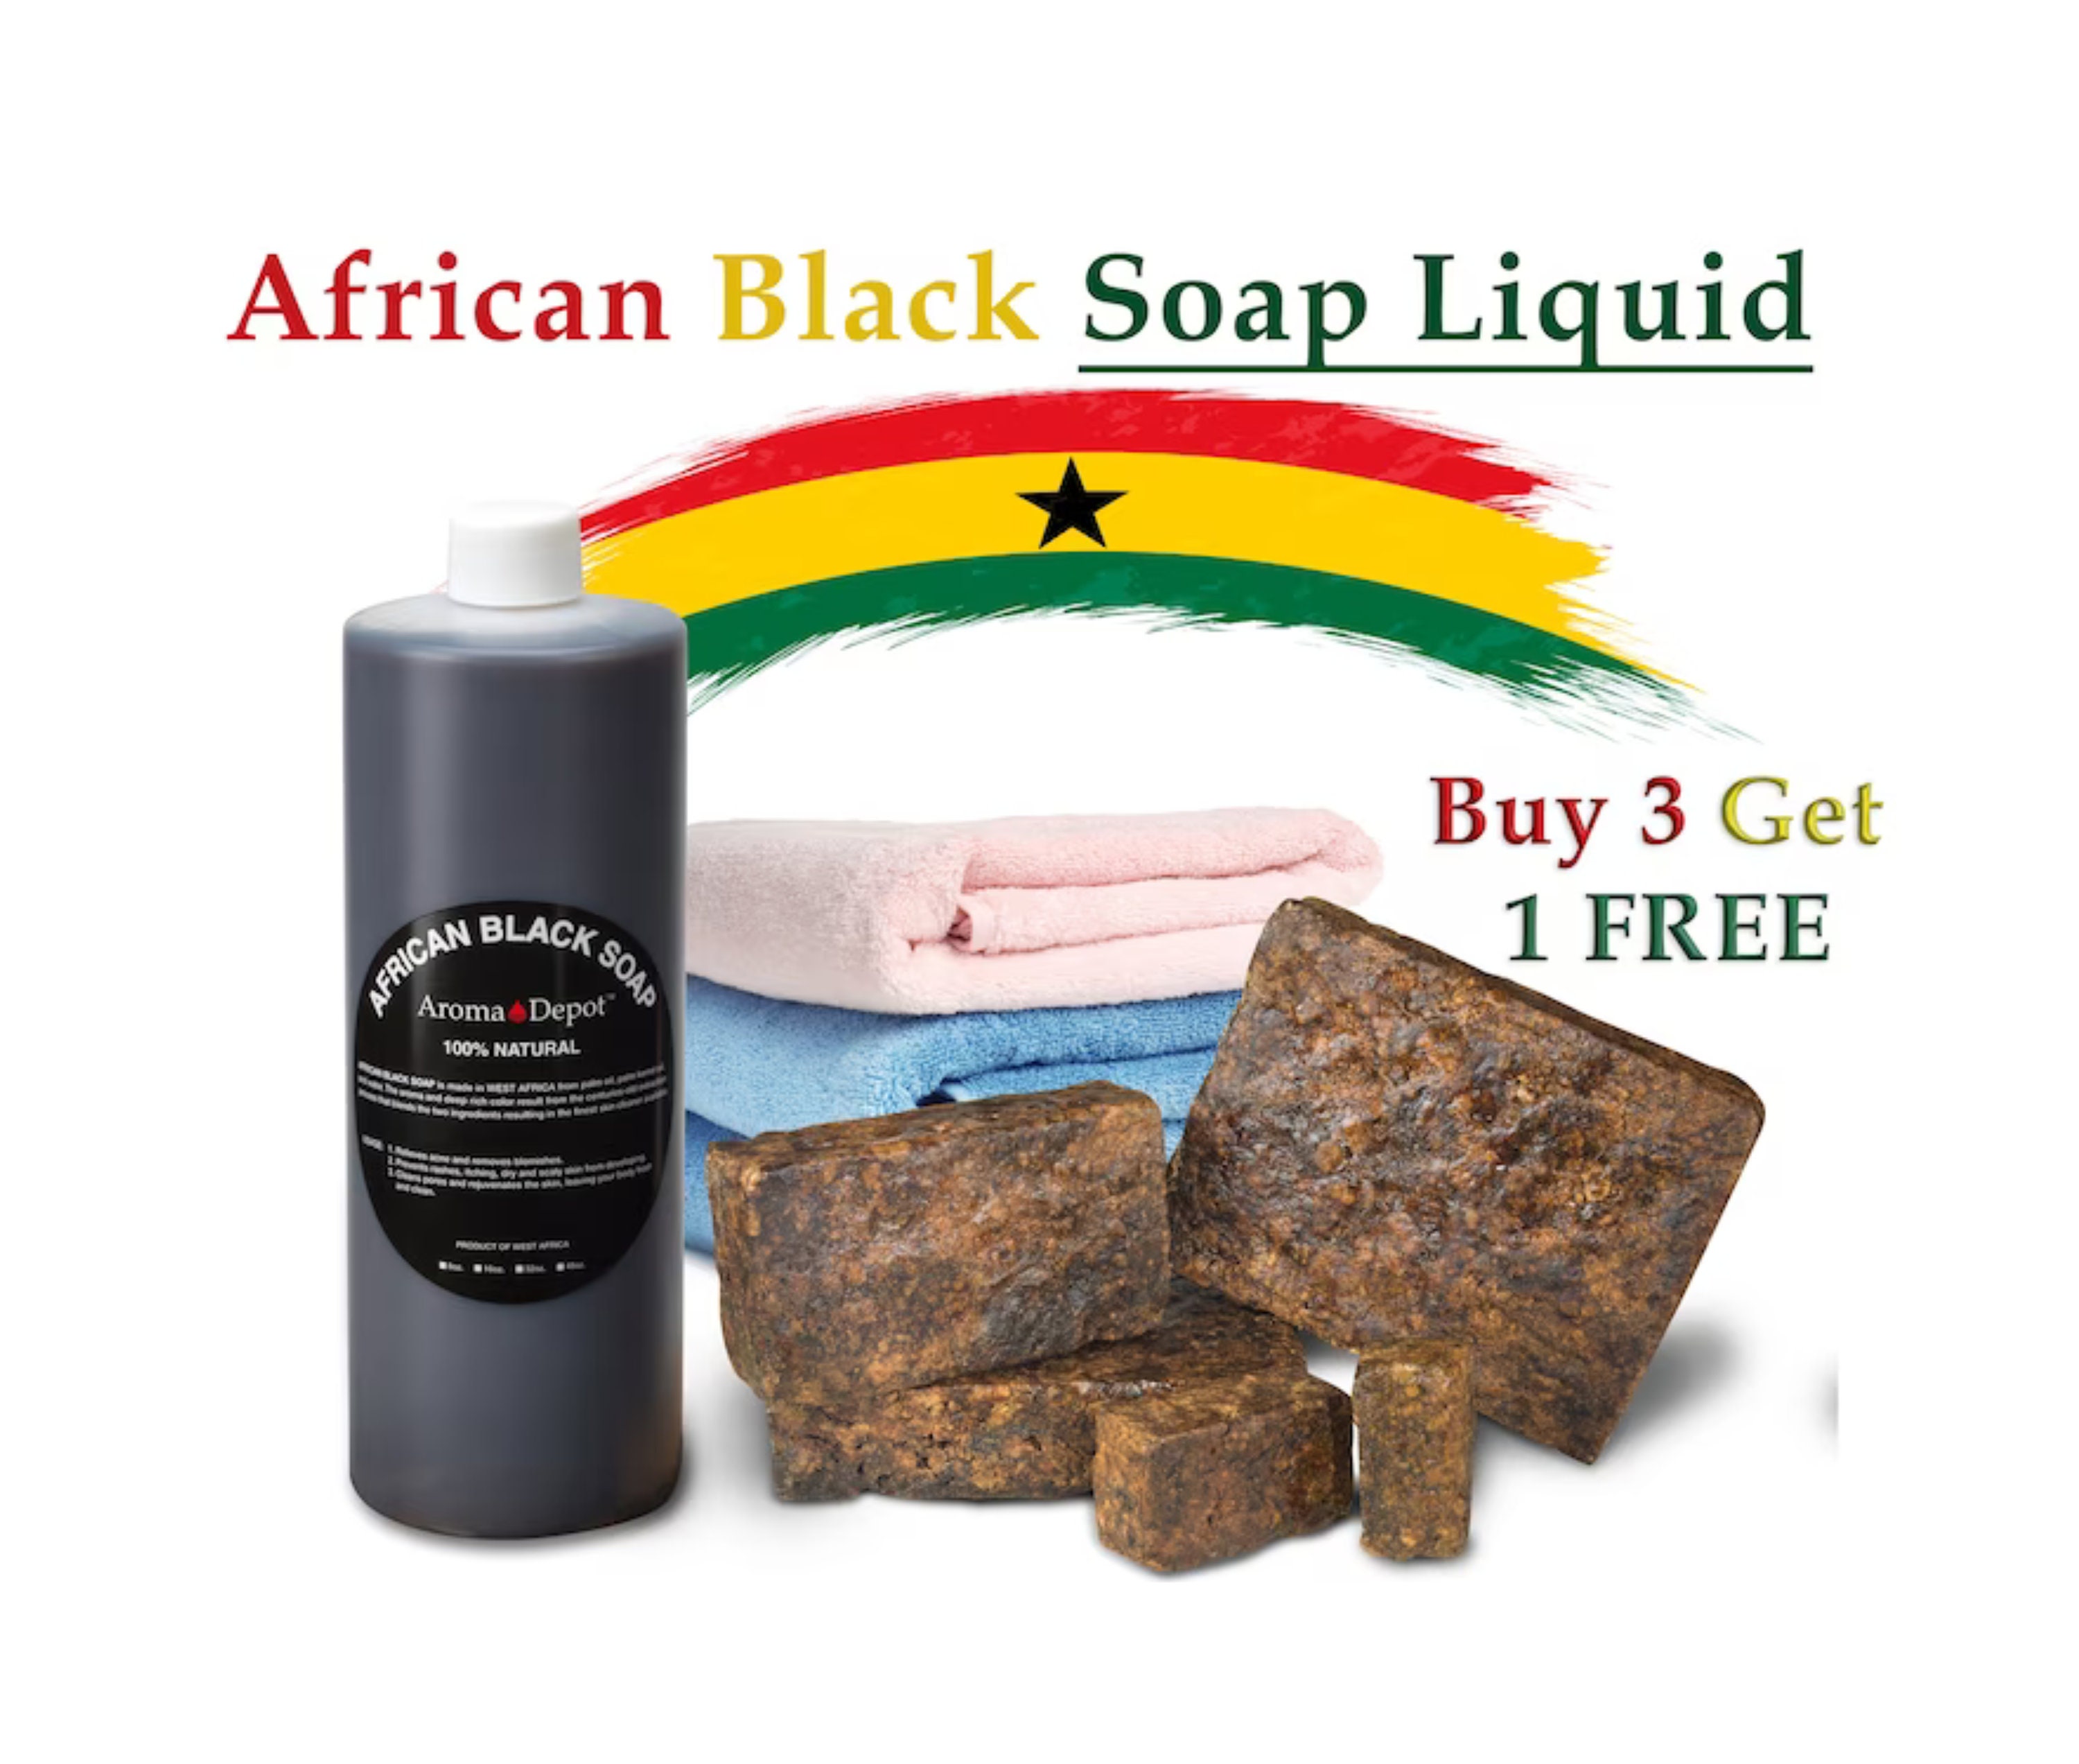 Aroma Depot Raw African Black Soap 1 lb. 100% Natural Raw Soap for